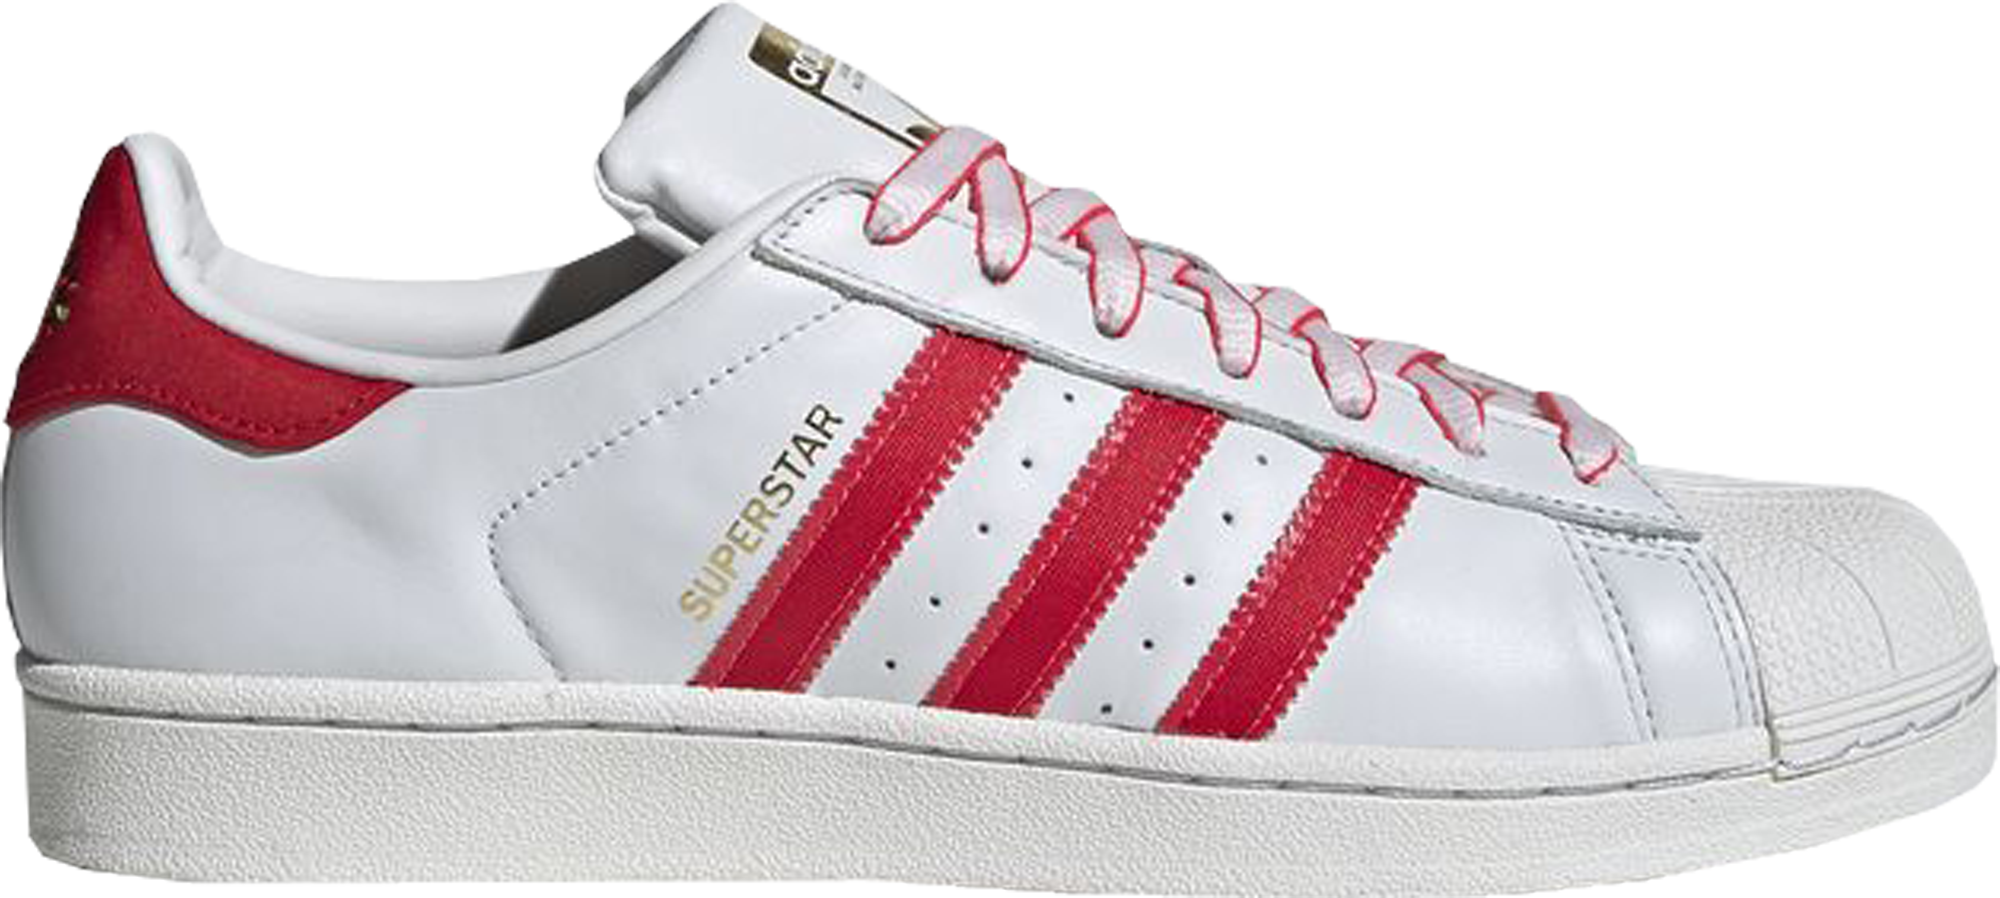 adidas chinese new year shoes 2019